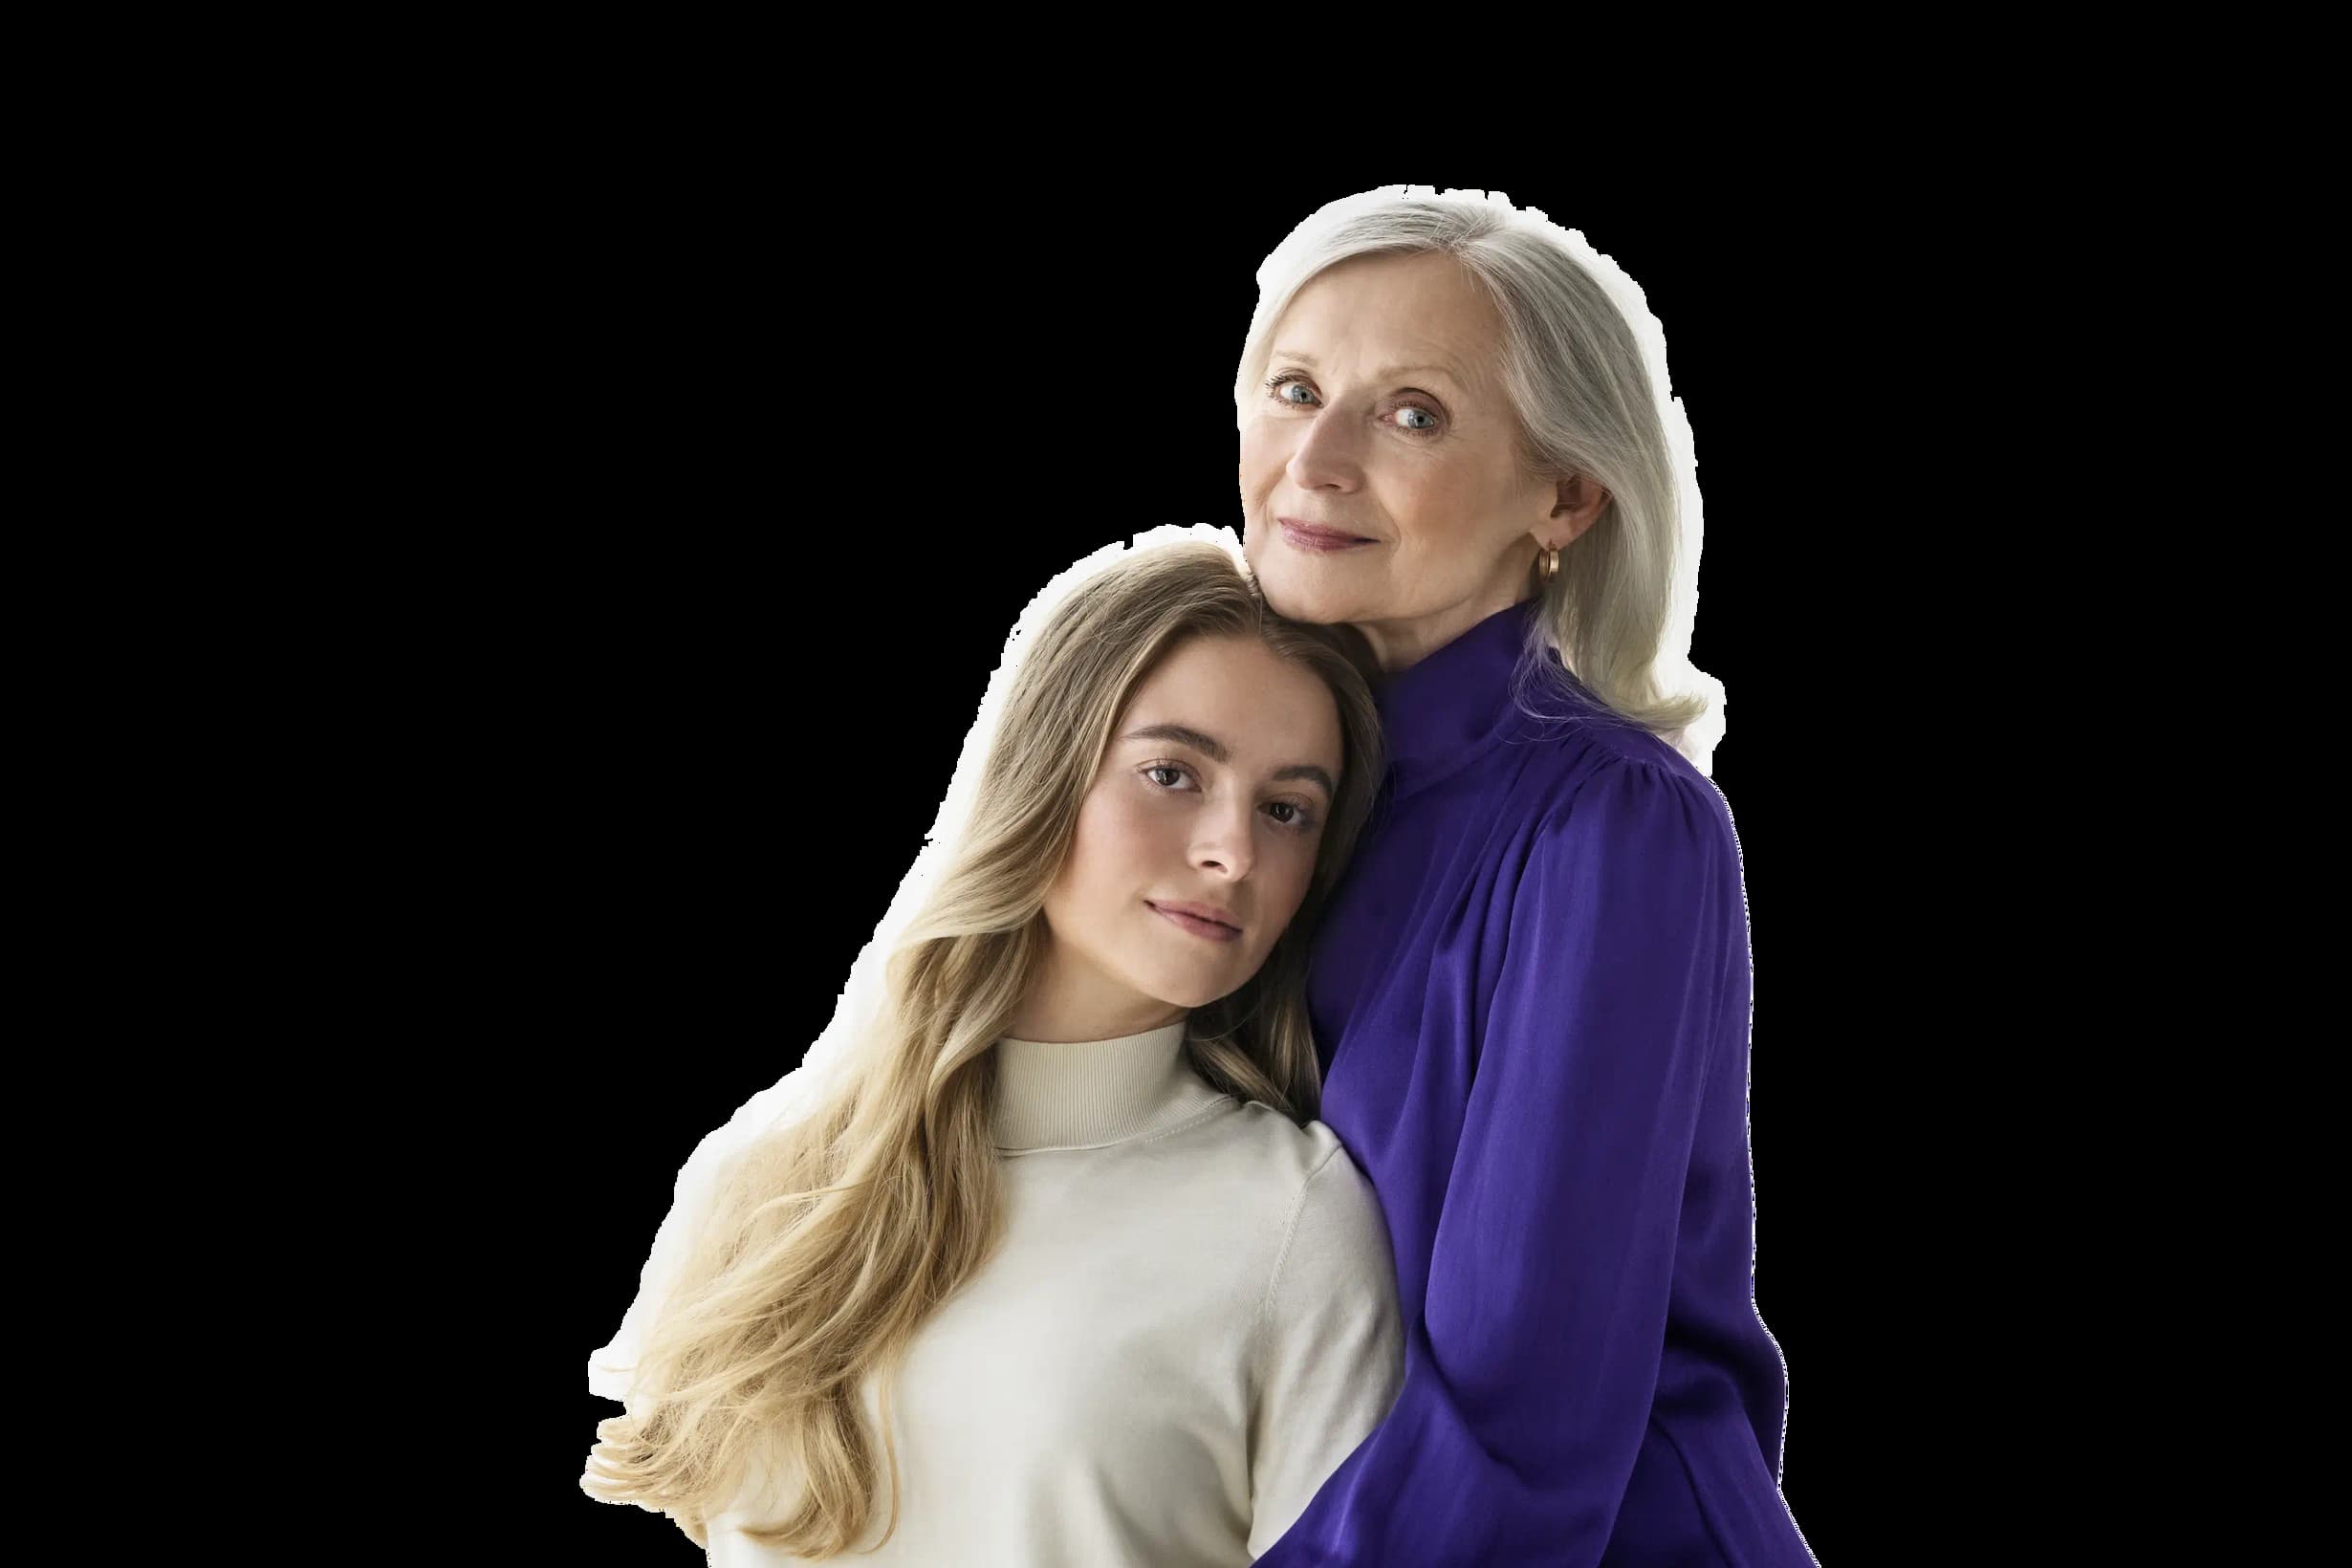 Connect with your daughter by wearing hearing aids